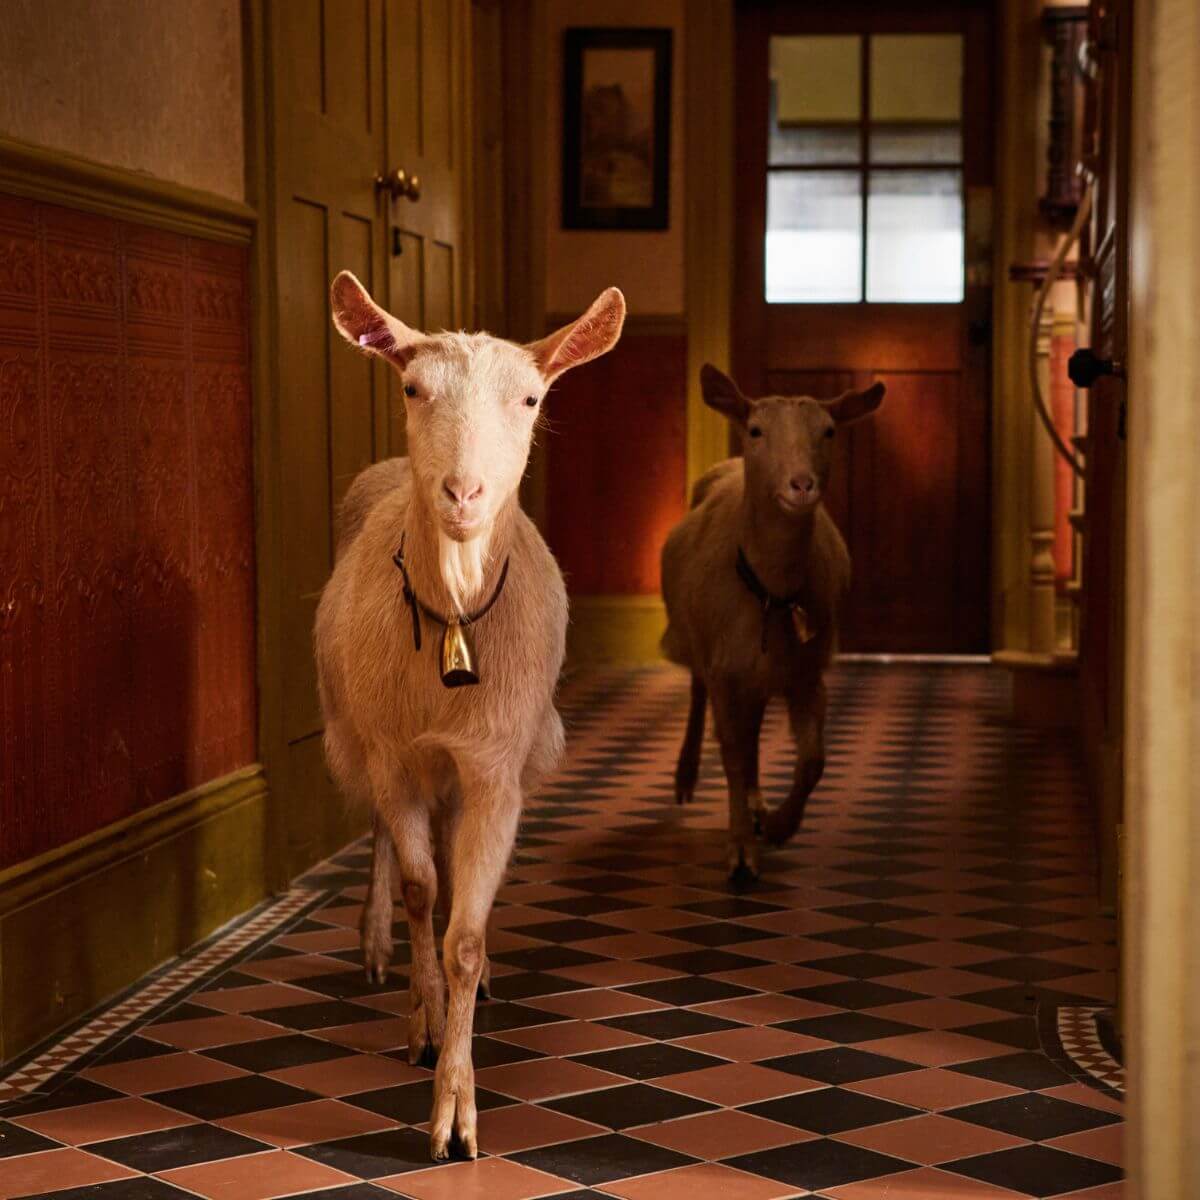 Goats inside house in All Creatures Great and Small Season 4